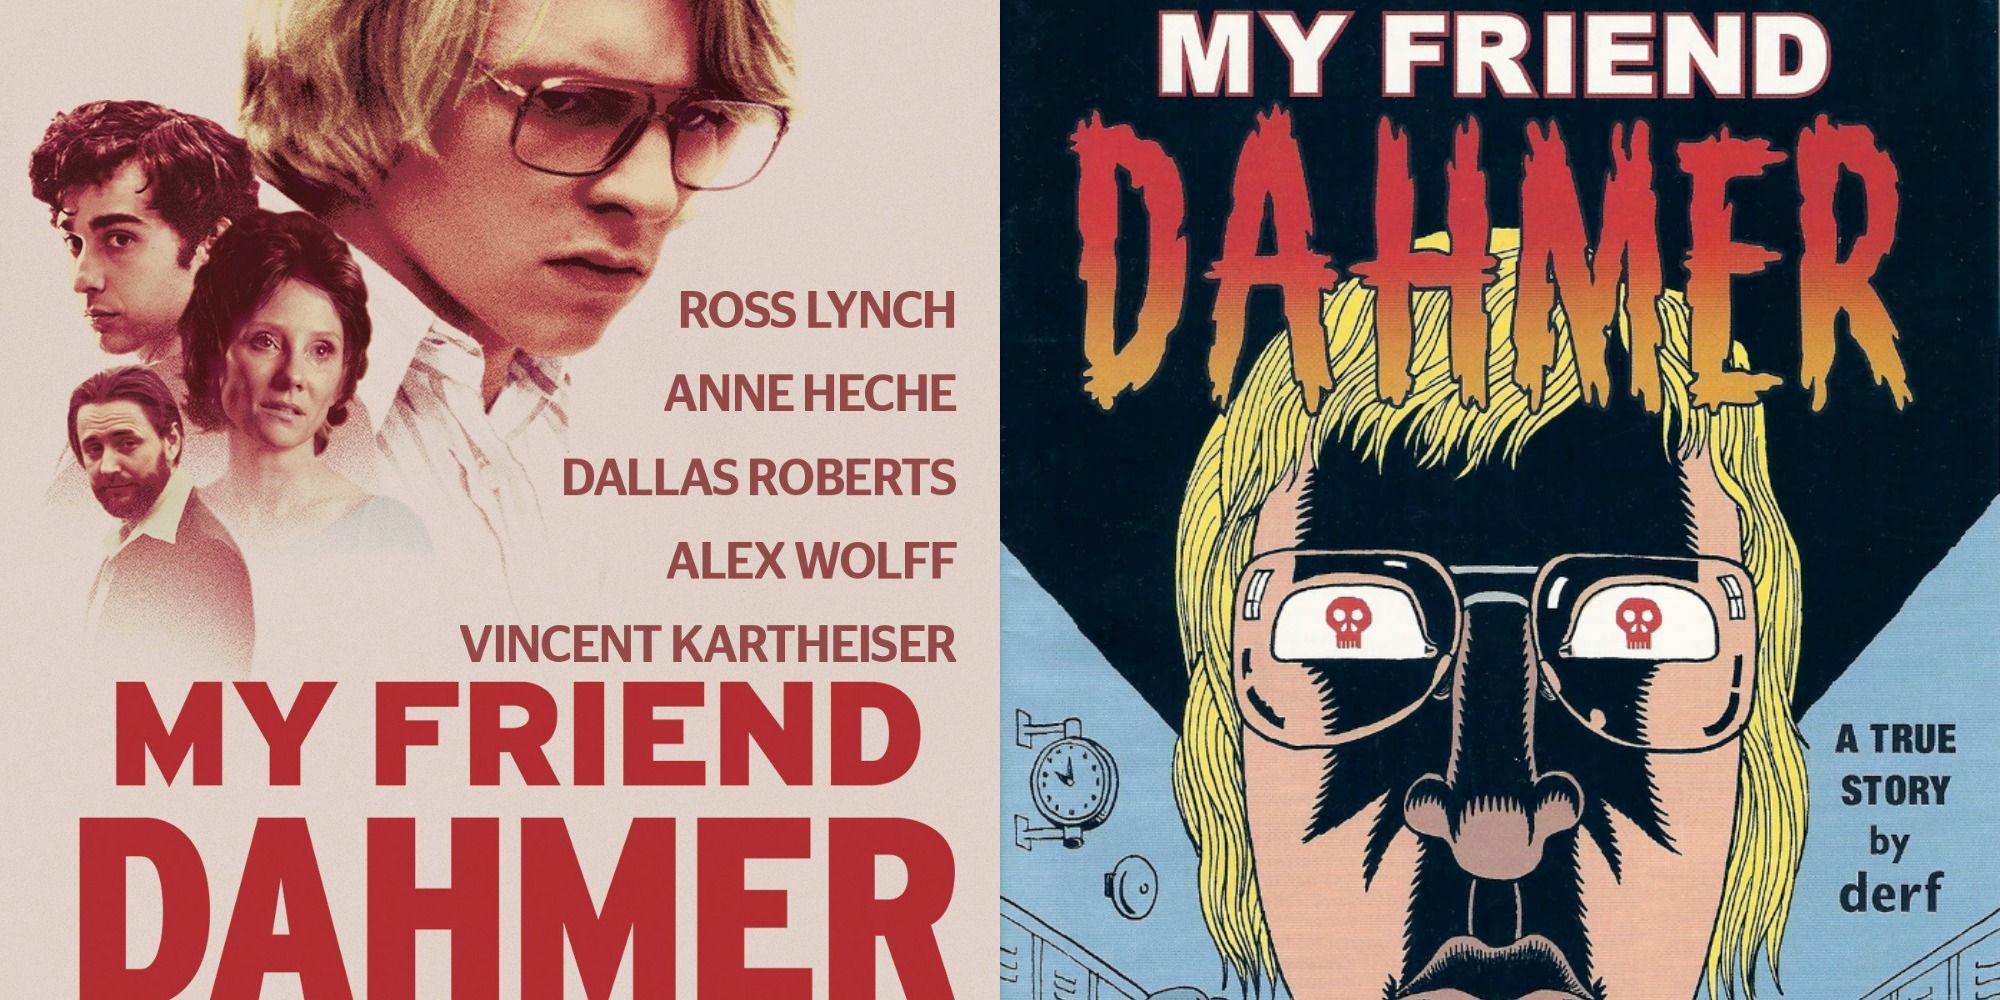 combined image of Ross Lynch in the poster of My Friend Dahmer and the comic it is based on